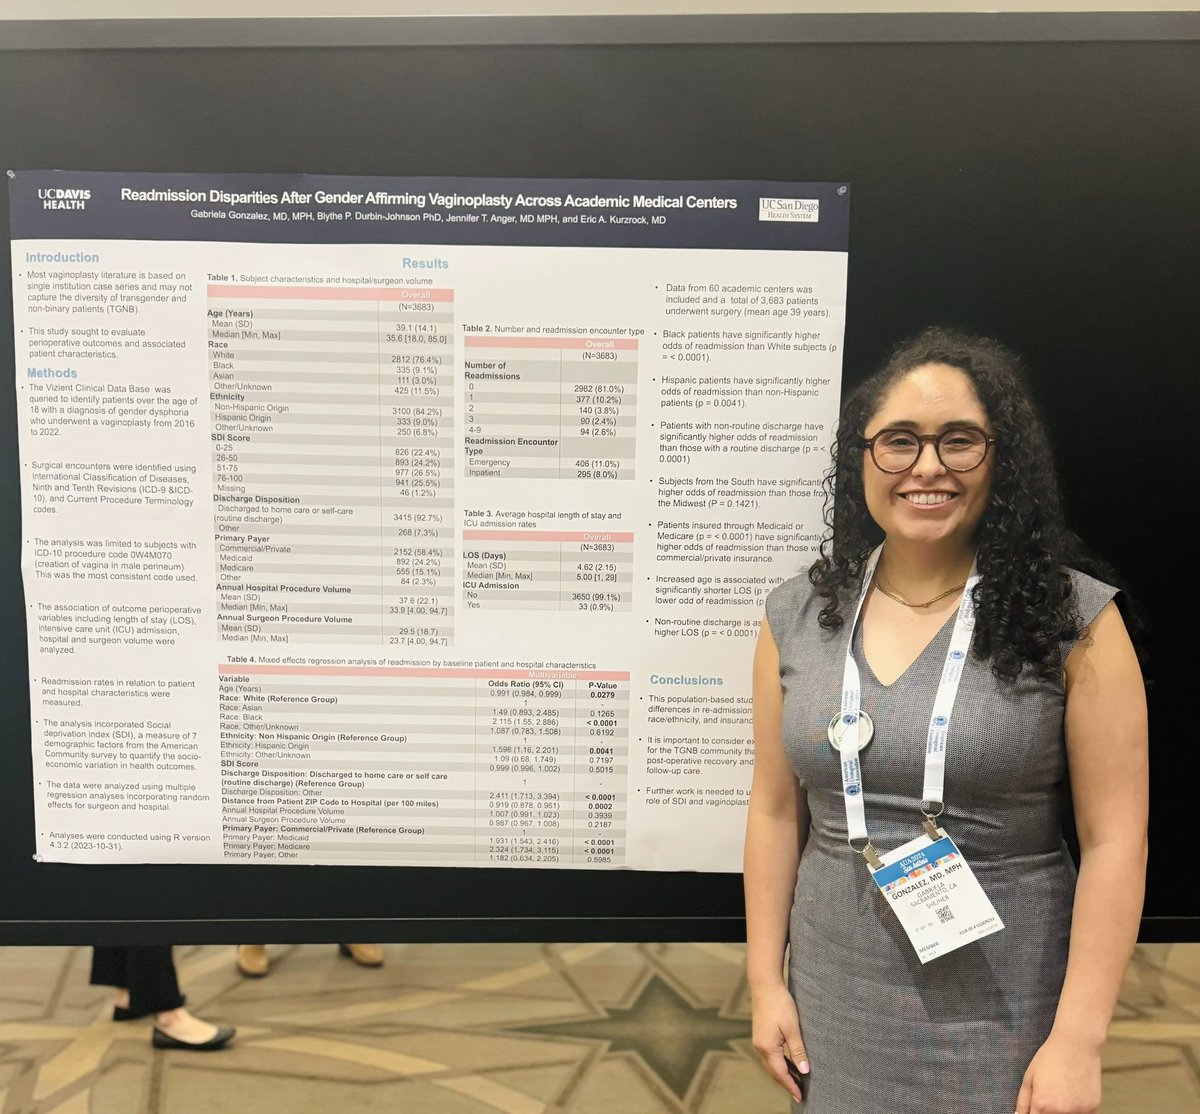 @GabyGonzalezMD Congrats on a great presentation addressing disparities in readmission after vaginoplasty! #AUA2024